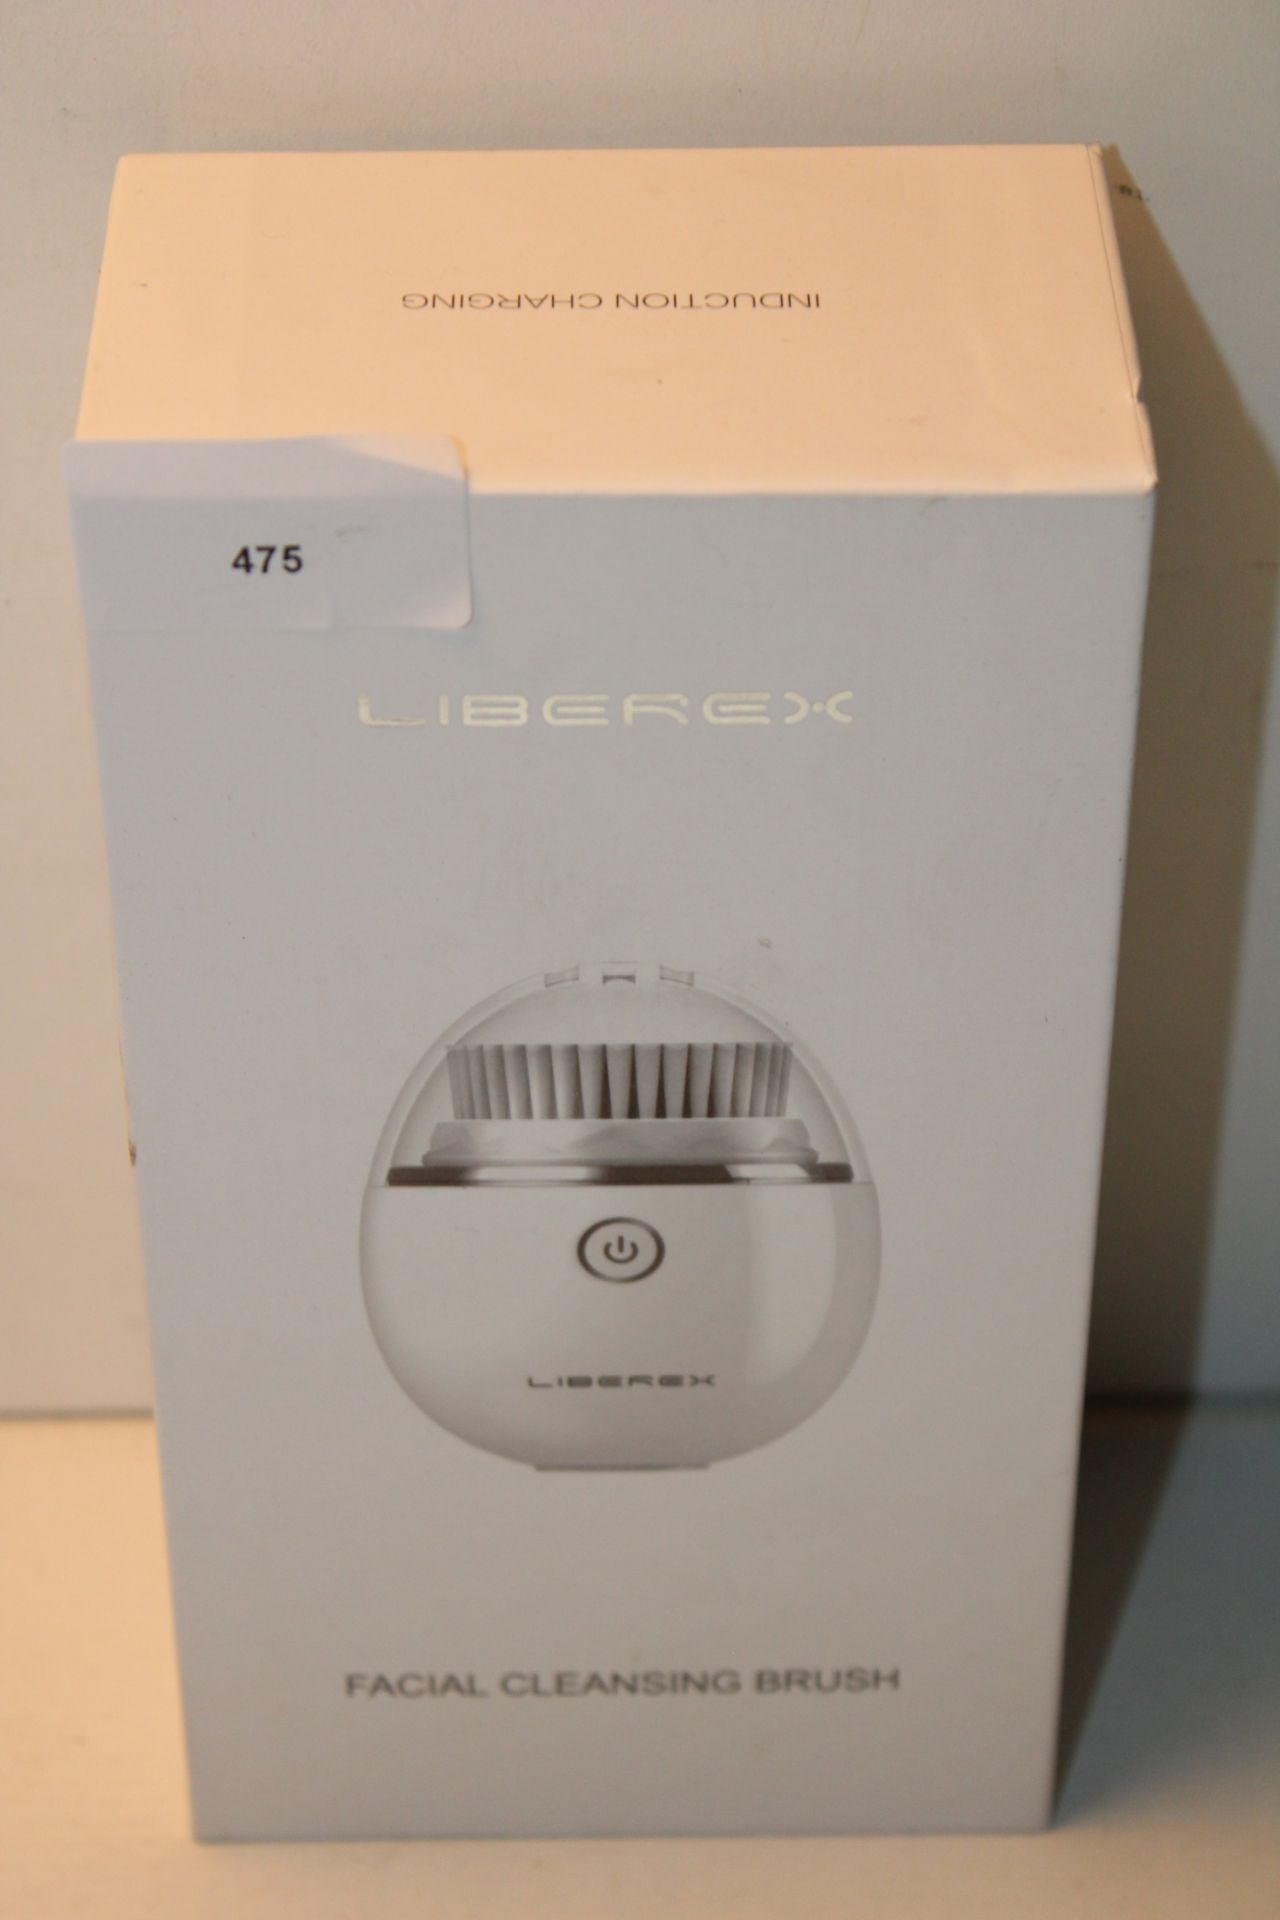 BOXED LIBEREX FACIAL CLEANSING BRUSH Condition ReportAppraisal Available on Request- All Items are